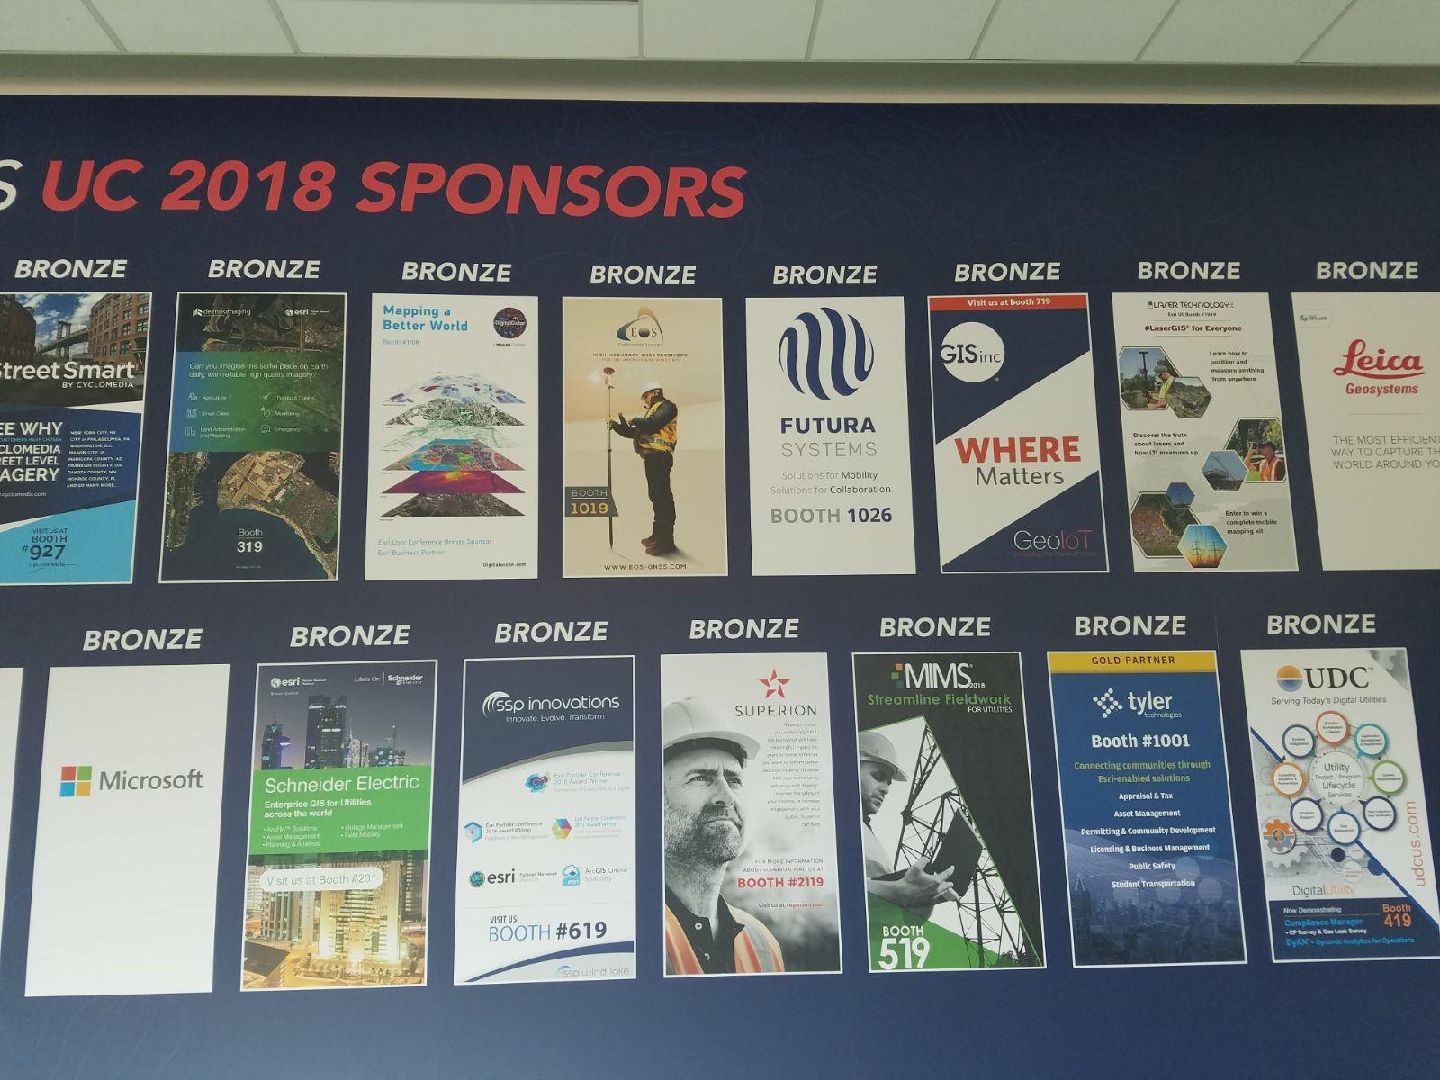 Wall of sponsors at Esri UC User Conference 2018